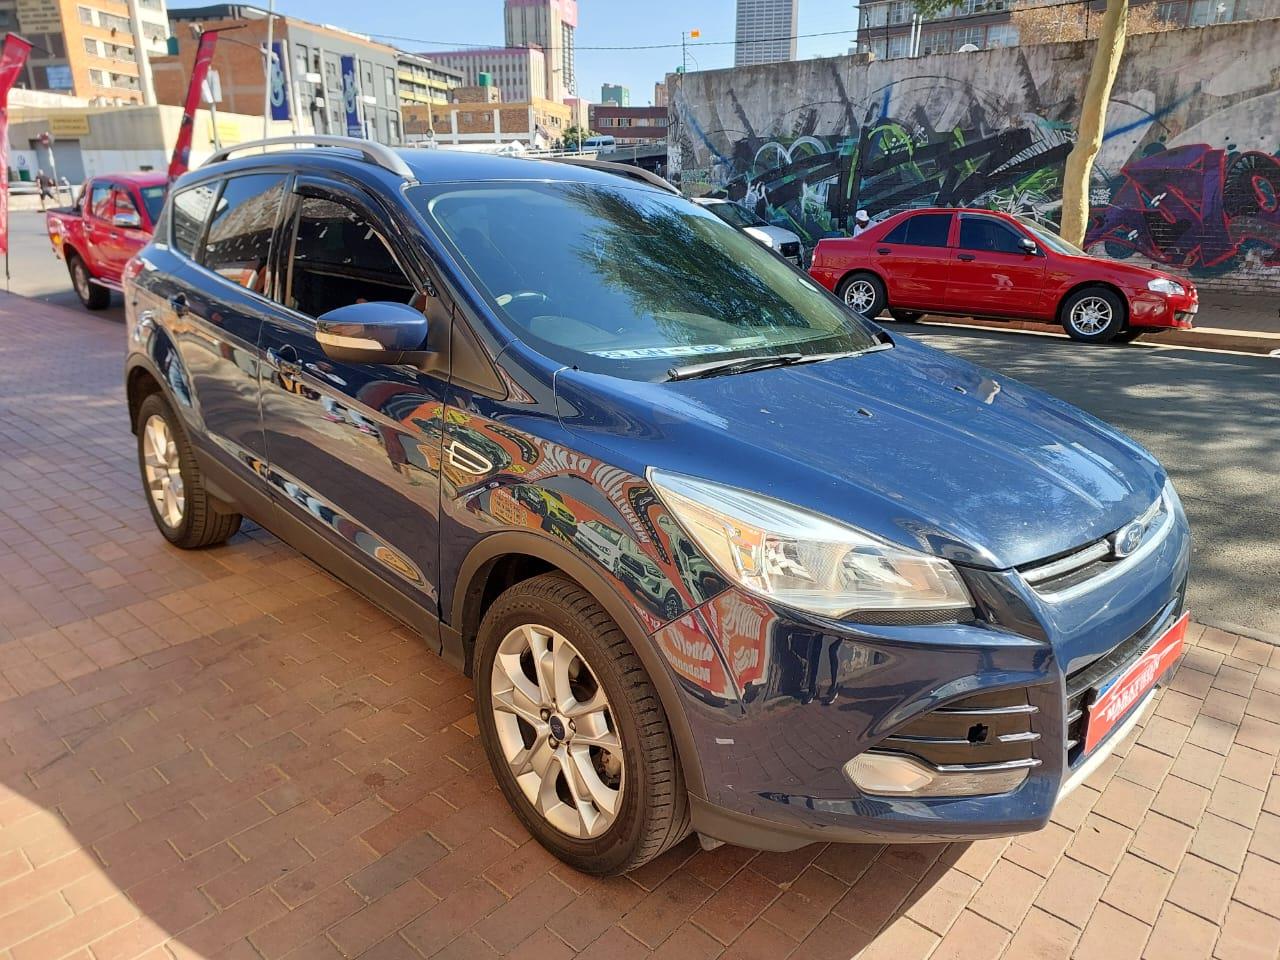 2017 Ford Kuga 1.5T Ambiente Auto For Sale